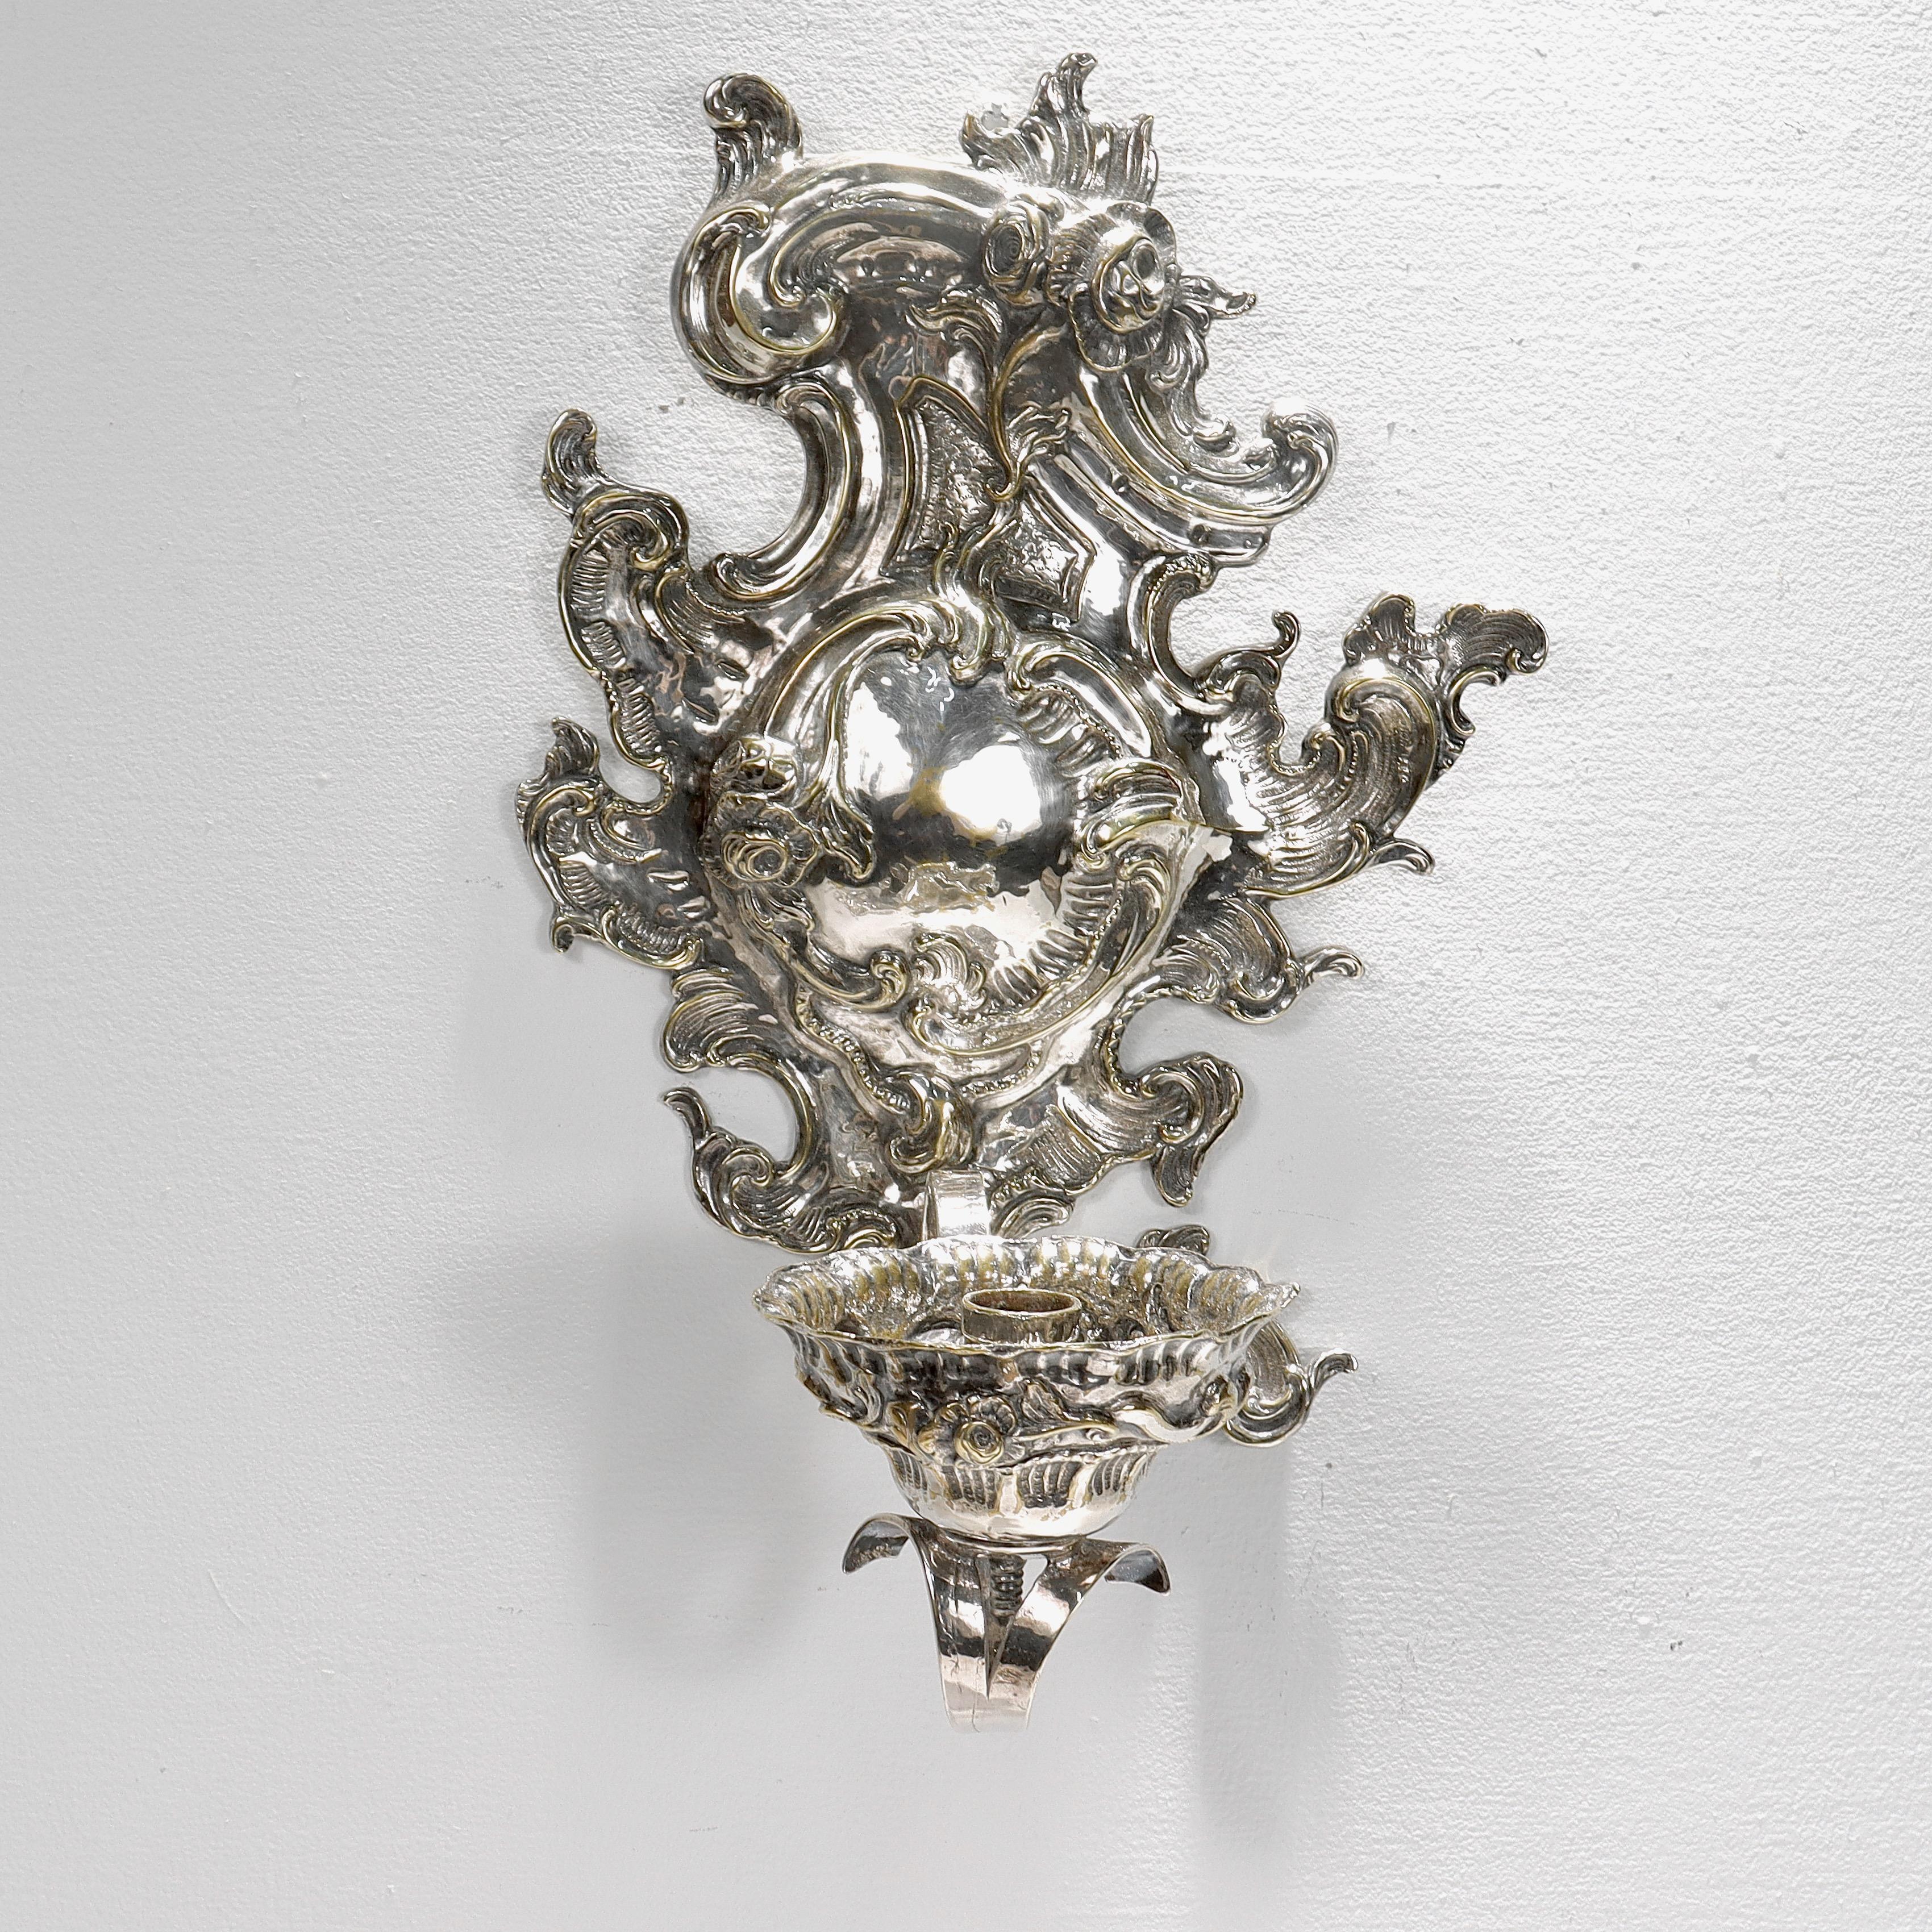 Antique Rococo or Rococo Revival Silver Plated Wall Sconces For Sale 4